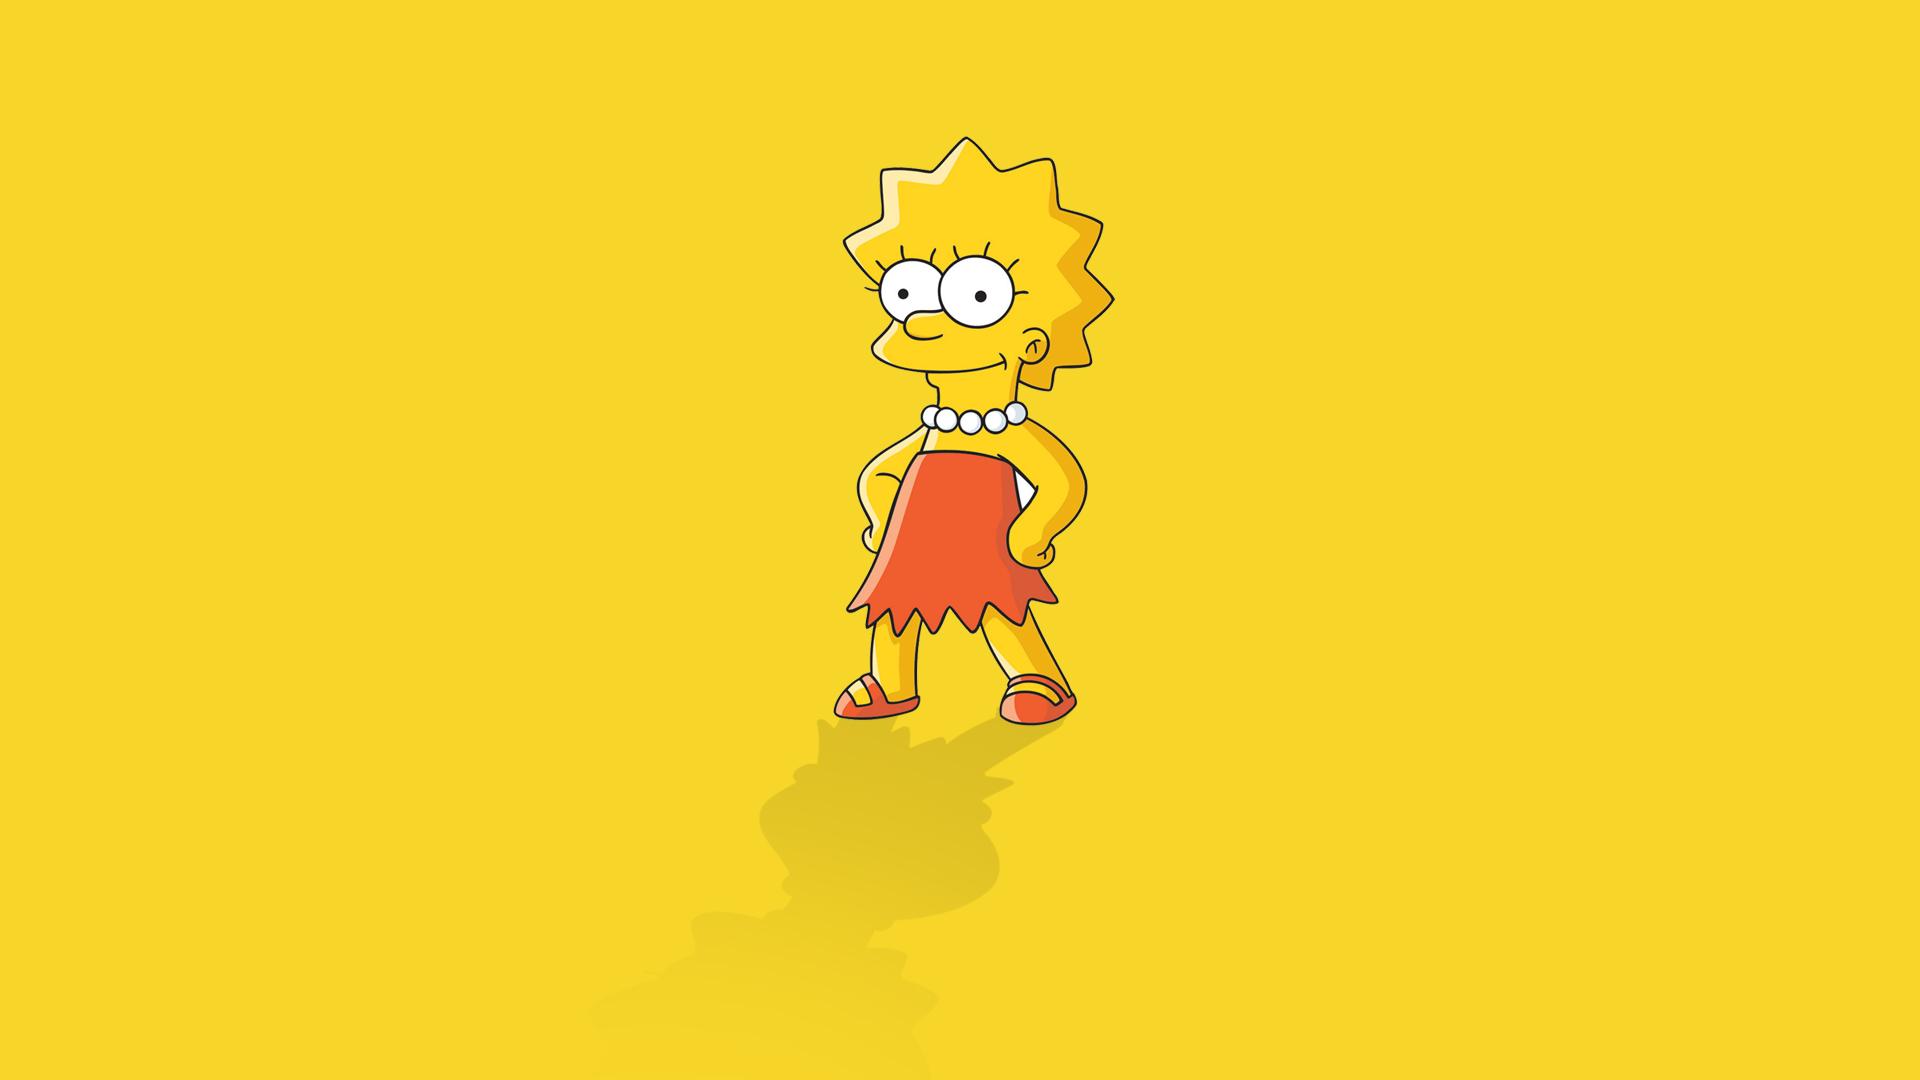 Download Rise up with empowerment like Lisa Simpson Wallpaper  Wallpapers com